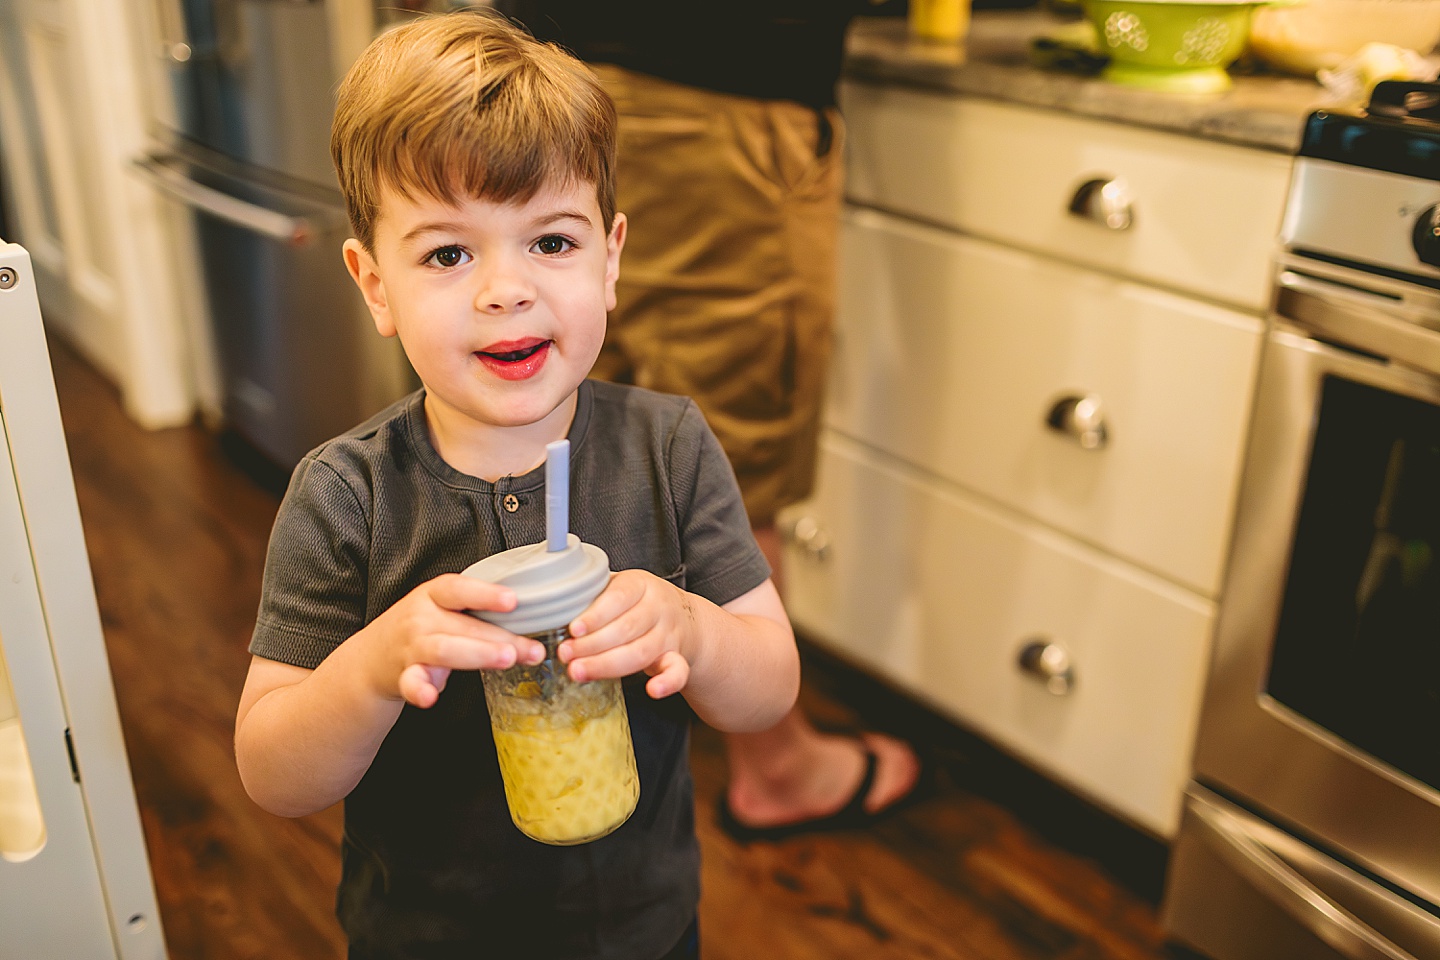 Toddler with a smoothie